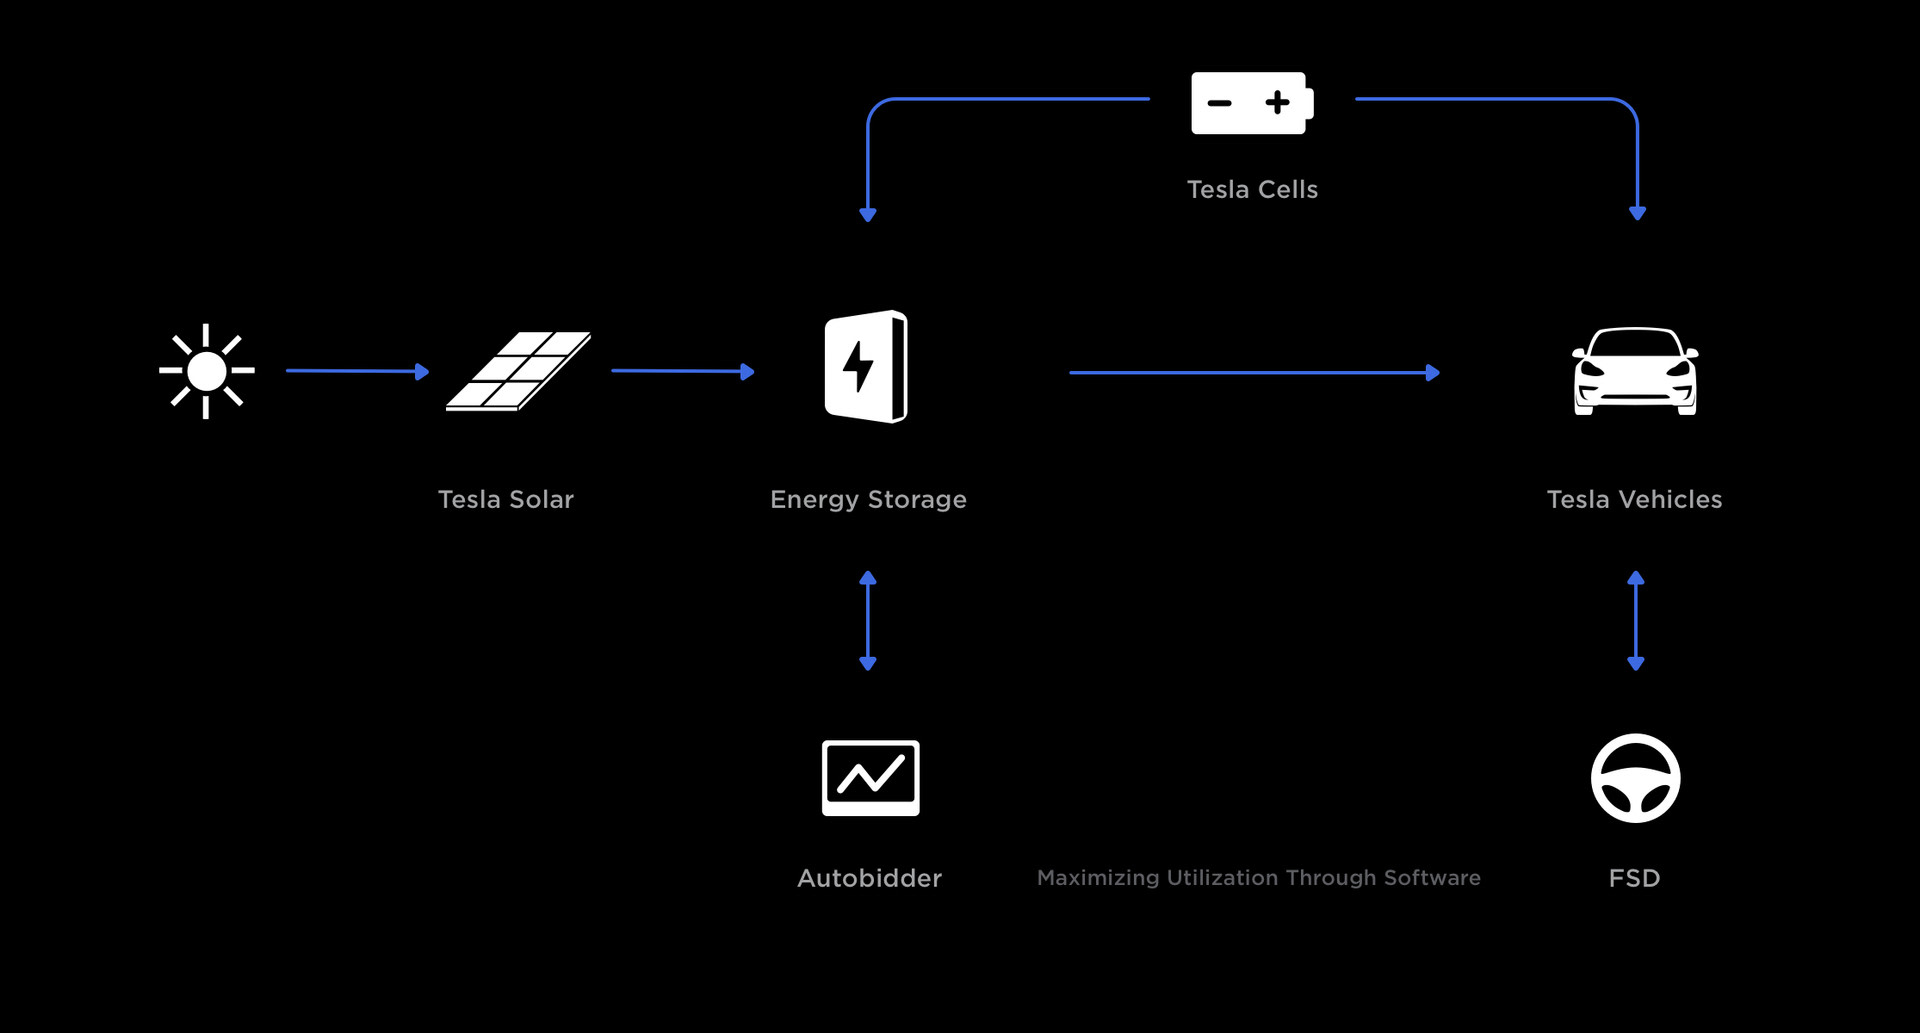 Diagram showing full ecosystem of Tesla products